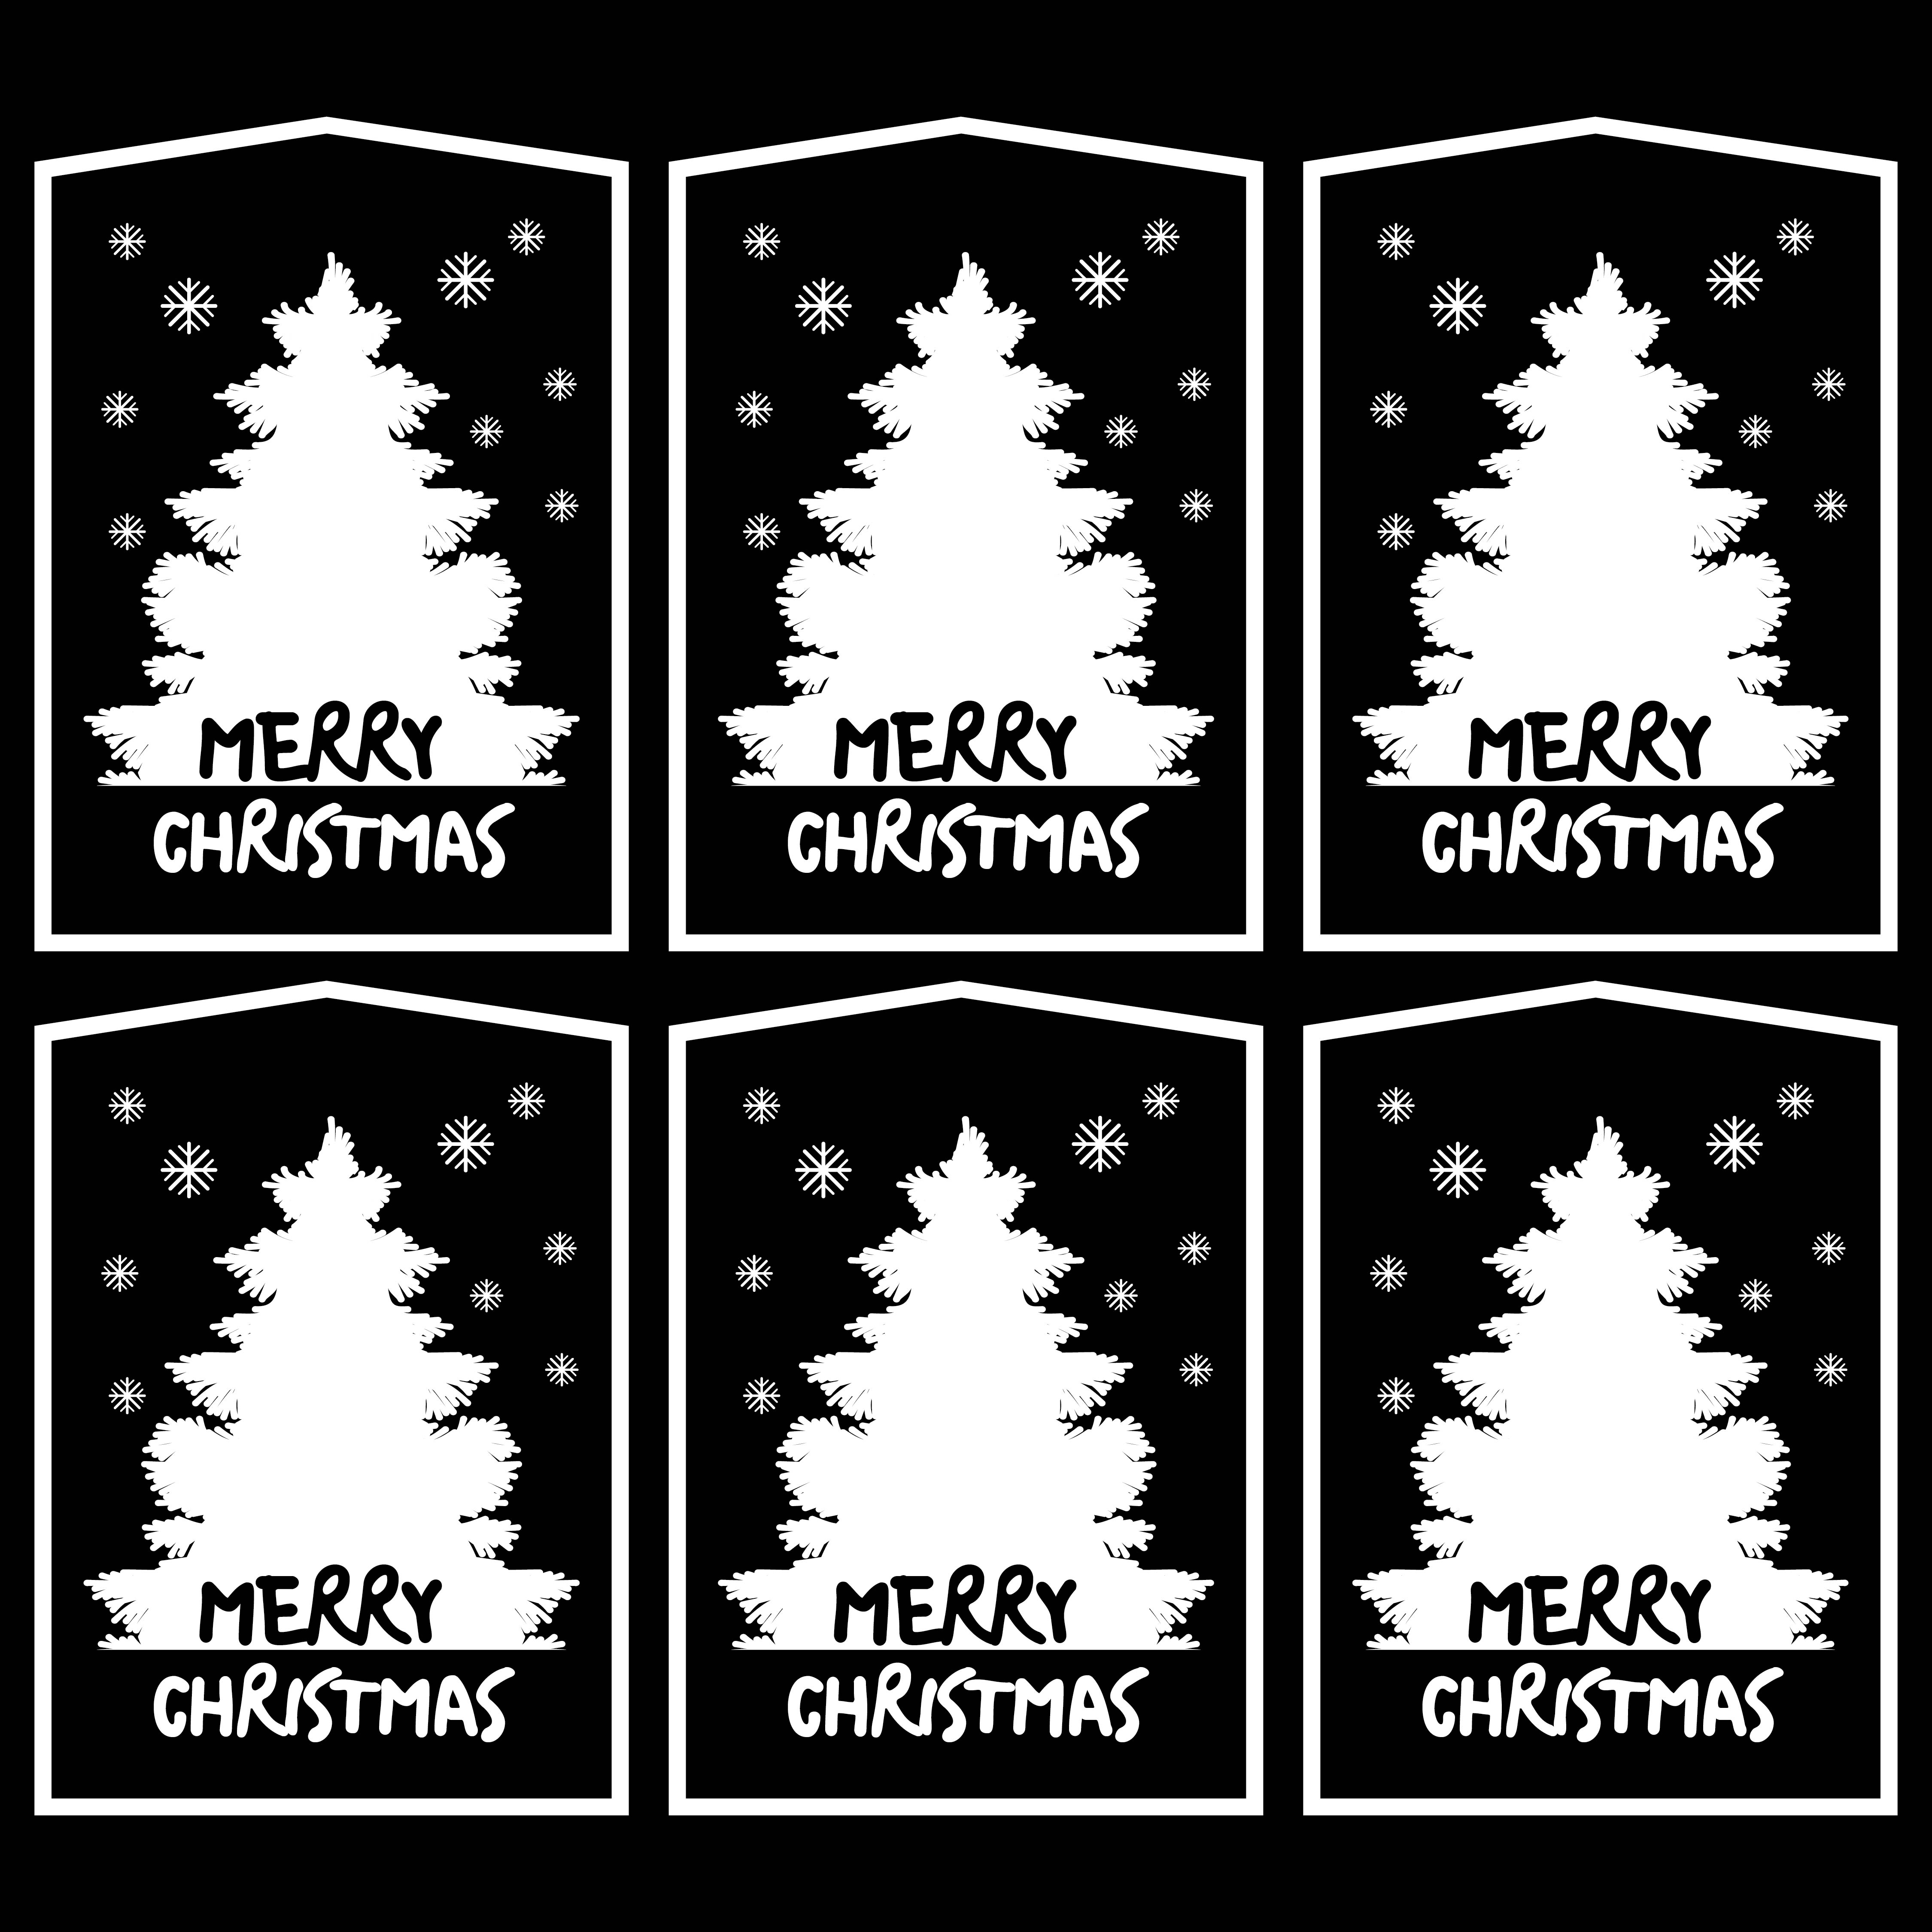 6-best-images-of-free-printable-christmas-gift-tags-black-and-white